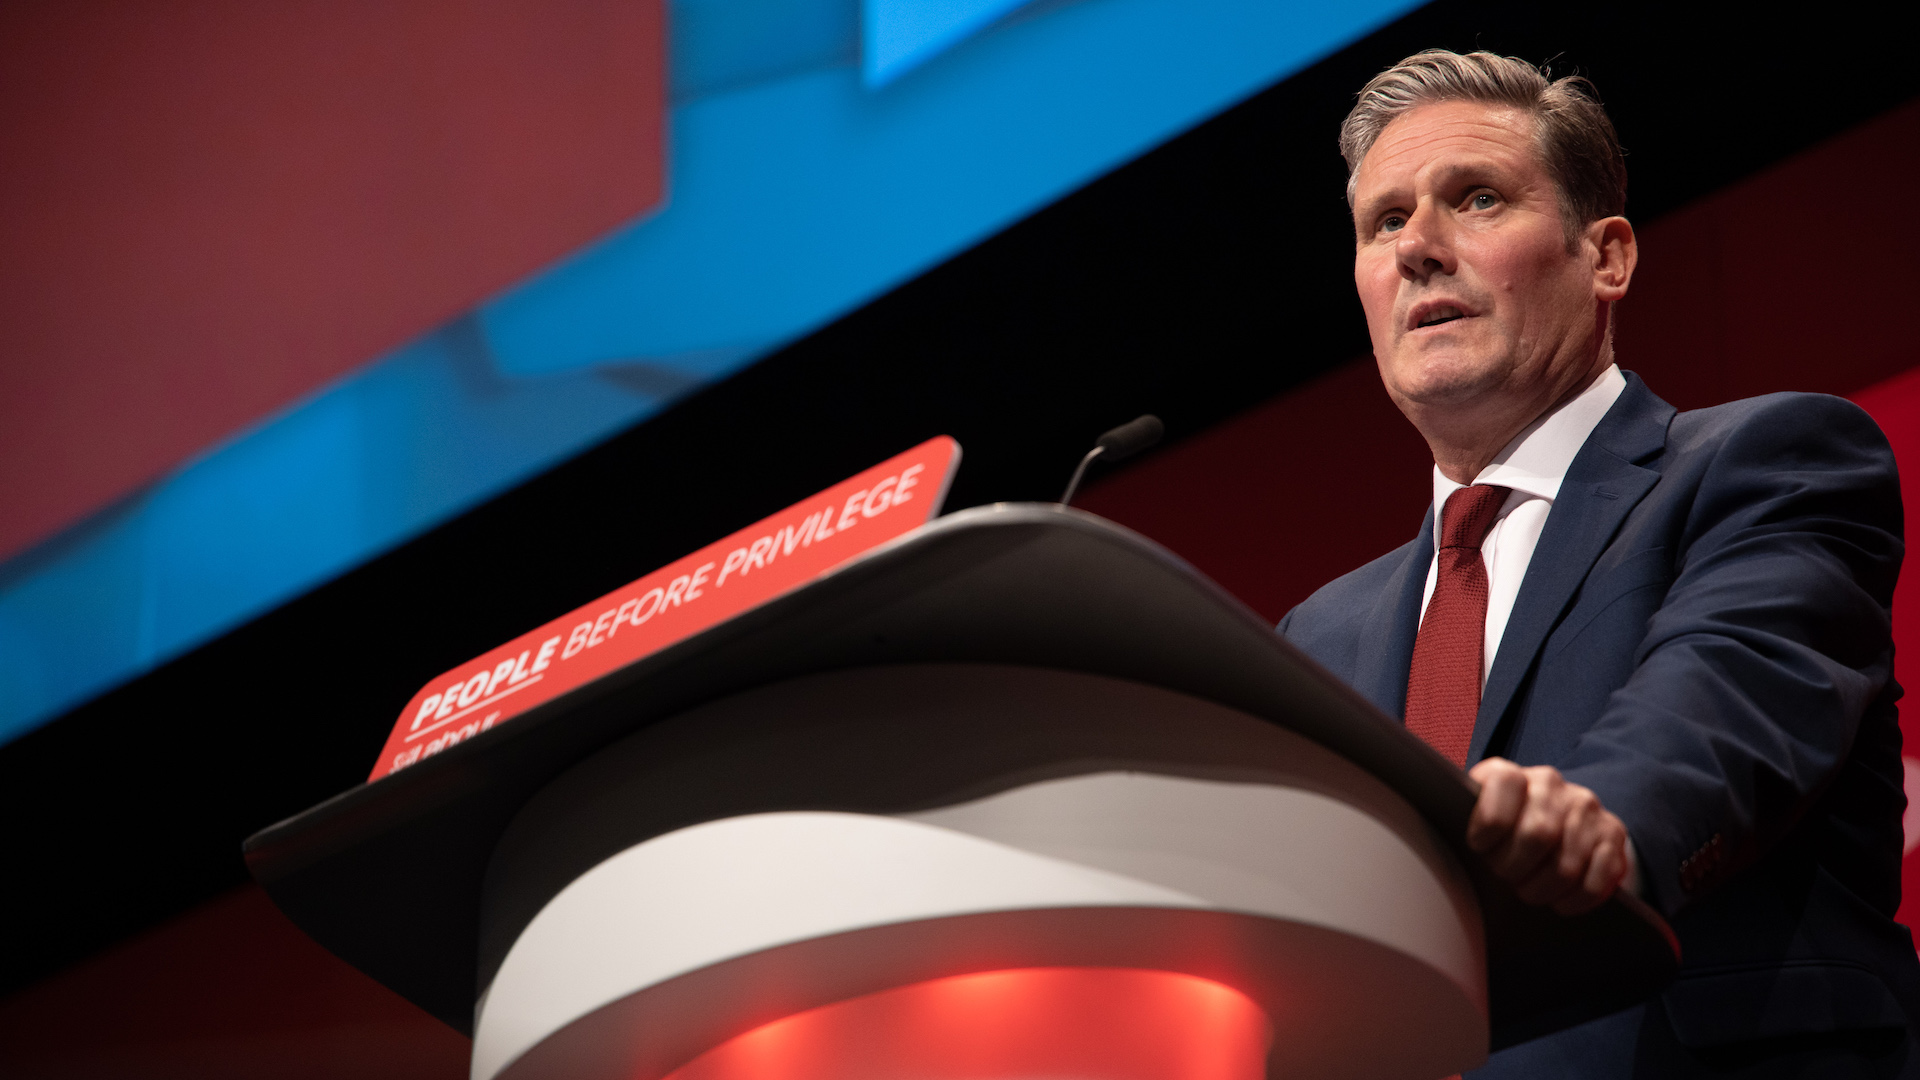 Labour leader Keir Starmer stnads at a lectern at Labour conference in 2019